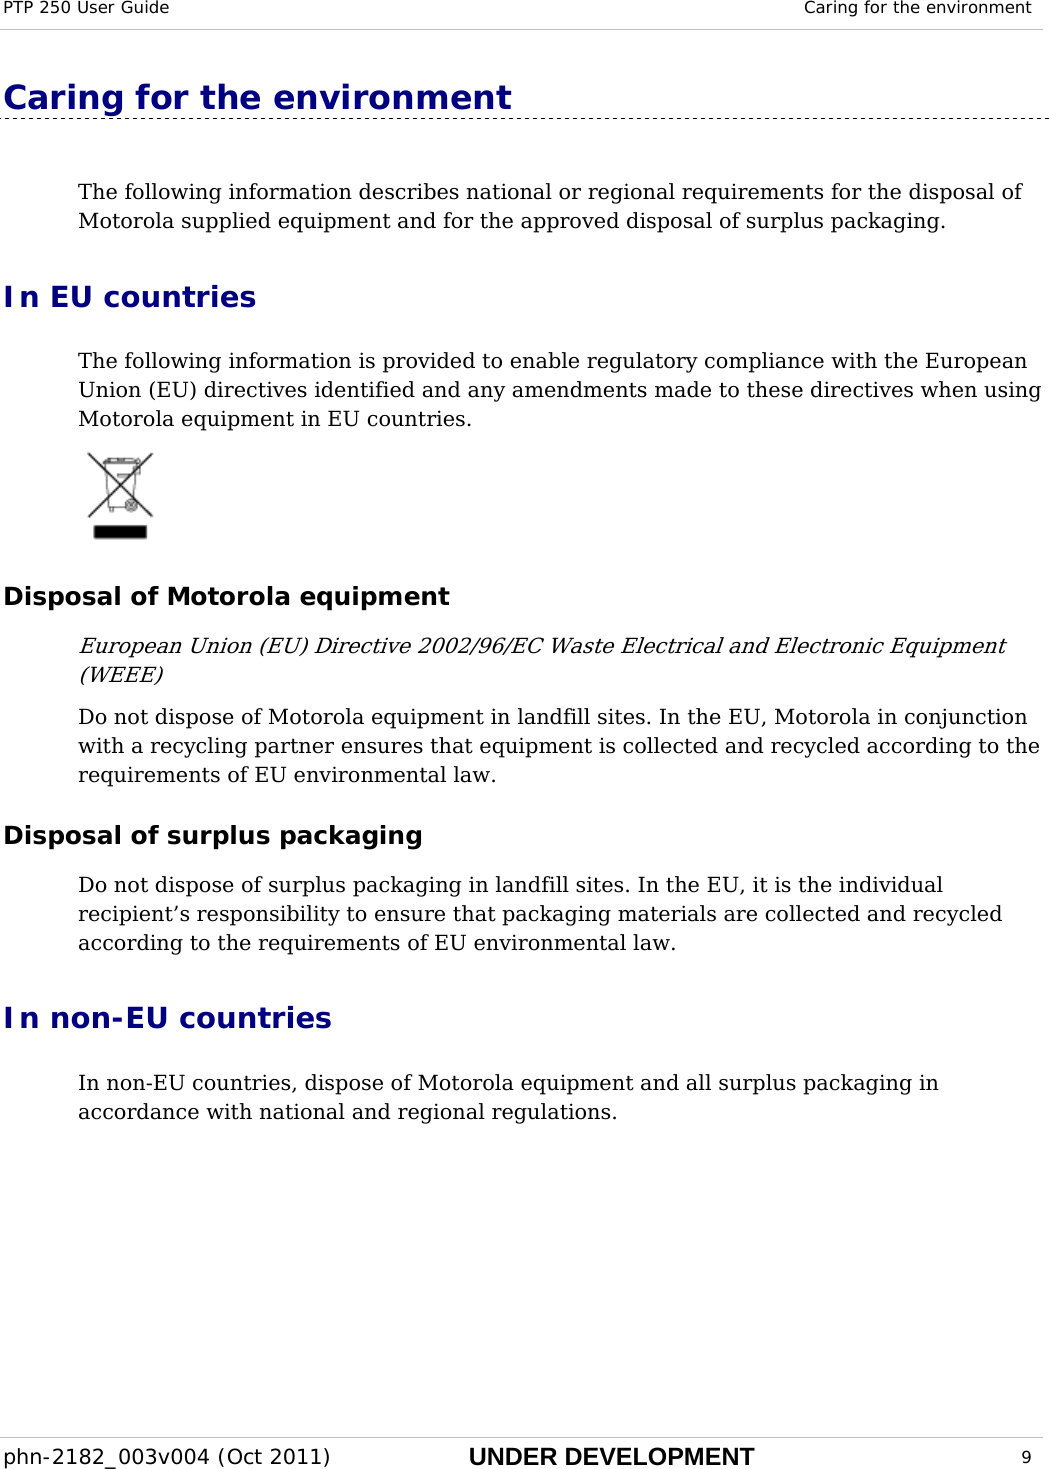 PTP 250 User Guide  Caring for the environment  phn-2182_003v004 (Oct 2011)  UNDER DEVELOPMENT  9  Caring for the environment The following information describes national or regional requirements for the disposal of Motorola supplied equipment and for the approved disposal of surplus packaging. In EU countries The following information is provided to enable regulatory compliance with the European Union (EU) directives identified and any amendments made to these directives when using Motorola equipment in EU countries.  Disposal of Motorola equipment European Union (EU) Directive 2002/96/EC Waste Electrical and Electronic Equipment (WEEE) Do not dispose of Motorola equipment in landfill sites. In the EU, Motorola in conjunction with a recycling partner ensures that equipment is collected and recycled according to the requirements of EU environmental law. Disposal of surplus packaging Do not dispose of surplus packaging in landfill sites. In the EU, it is the individual recipient’s responsibility to ensure that packaging materials are collected and recycled according to the requirements of EU environmental law. In non-EU countries In non-EU countries, dispose of Motorola equipment and all surplus packaging in accordance with national and regional regulations.  